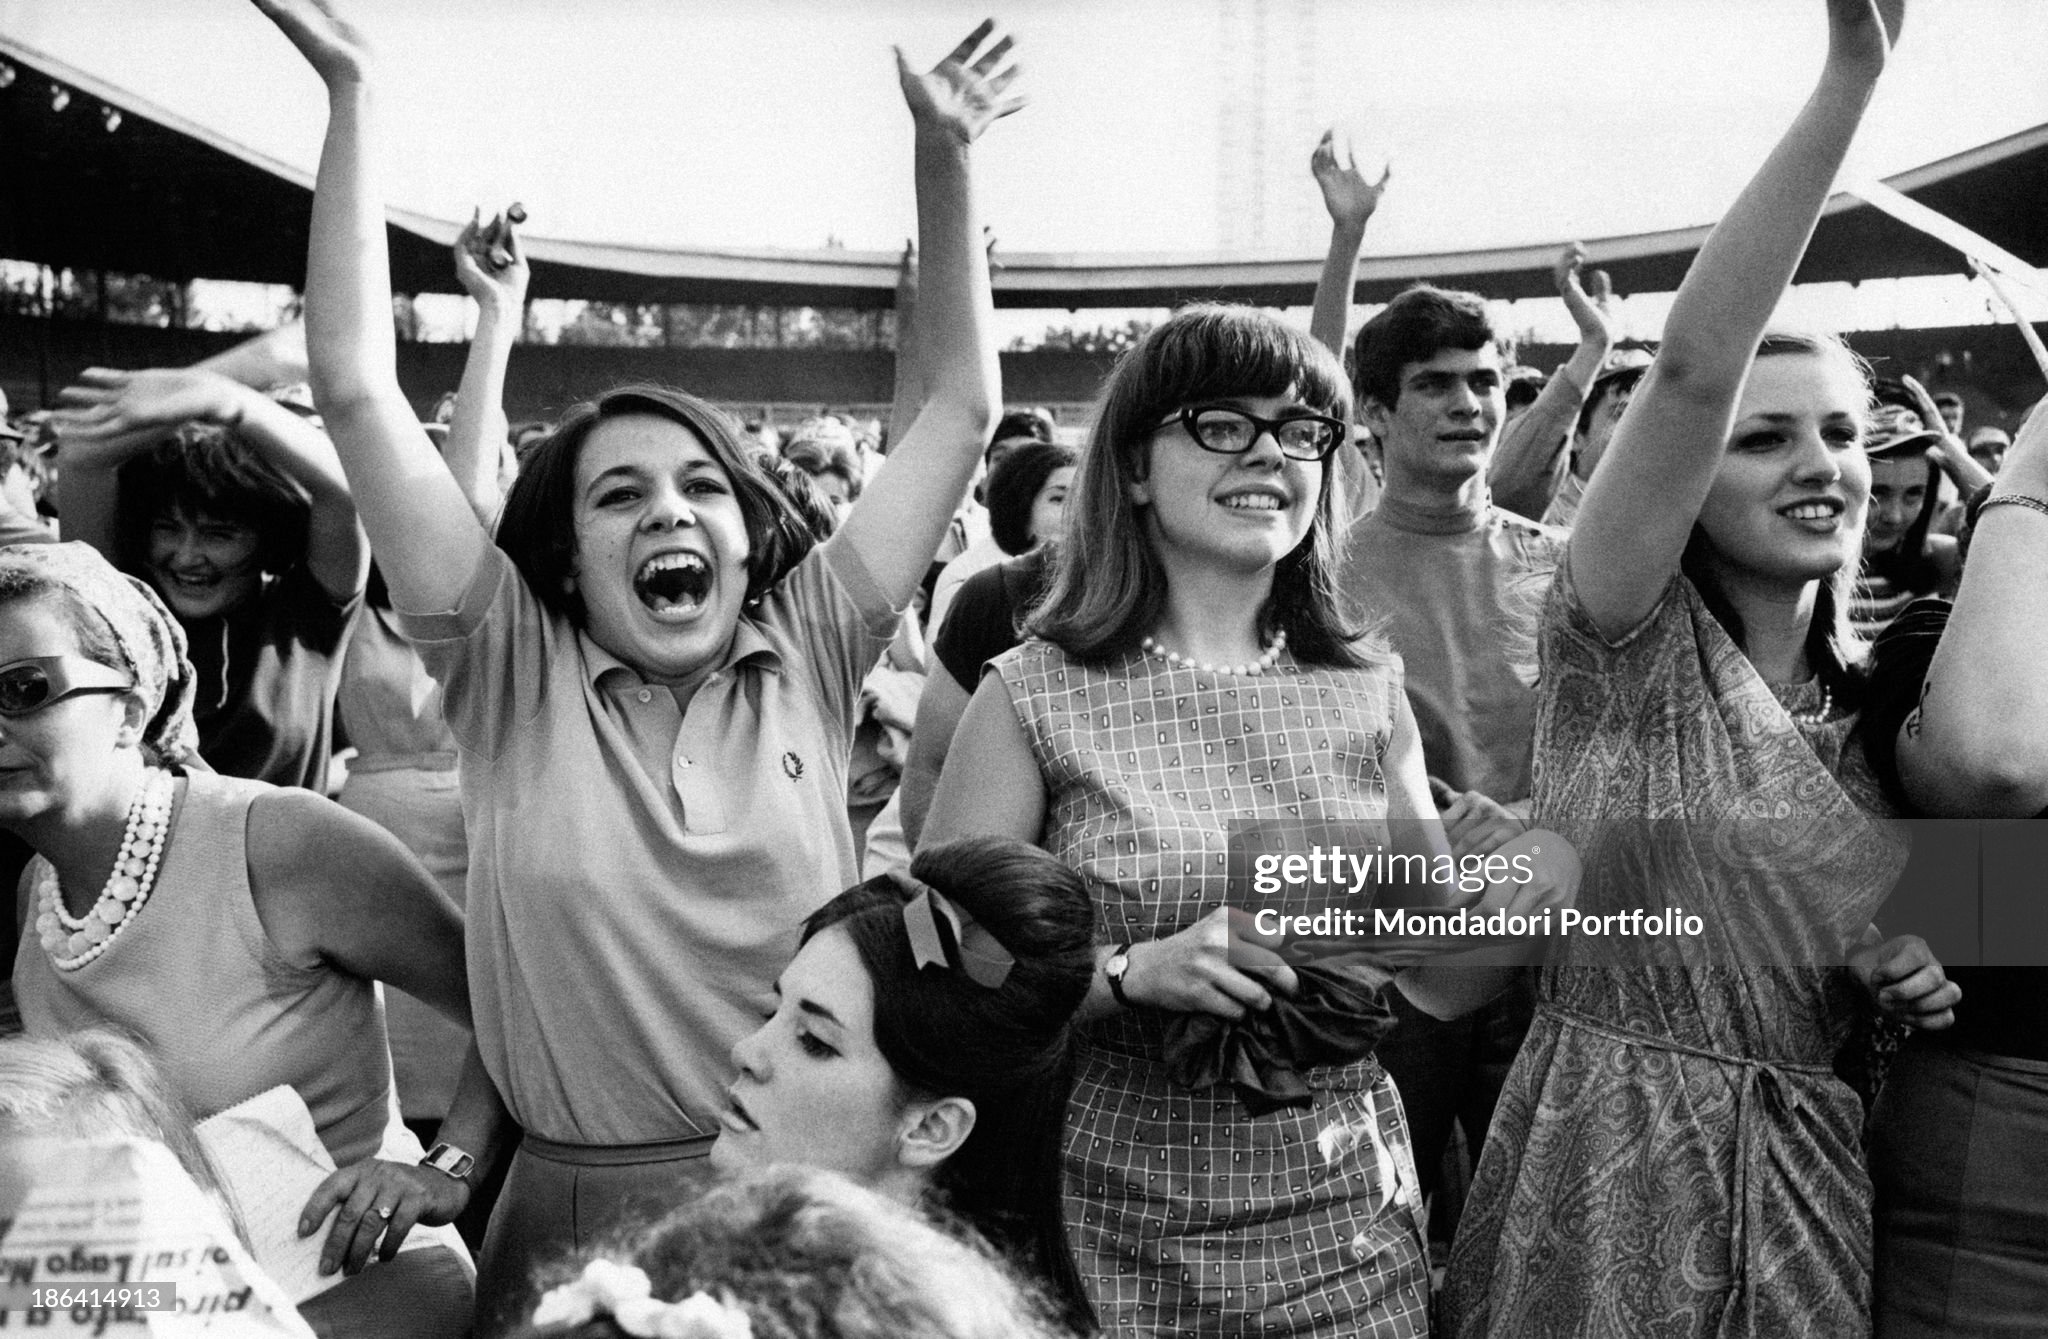 Some girls at the Velodrome Vigorelli at the concert of the British band The Beatles, in their first leg of the summer tour in Italy in Milan on 24 June 1965. 